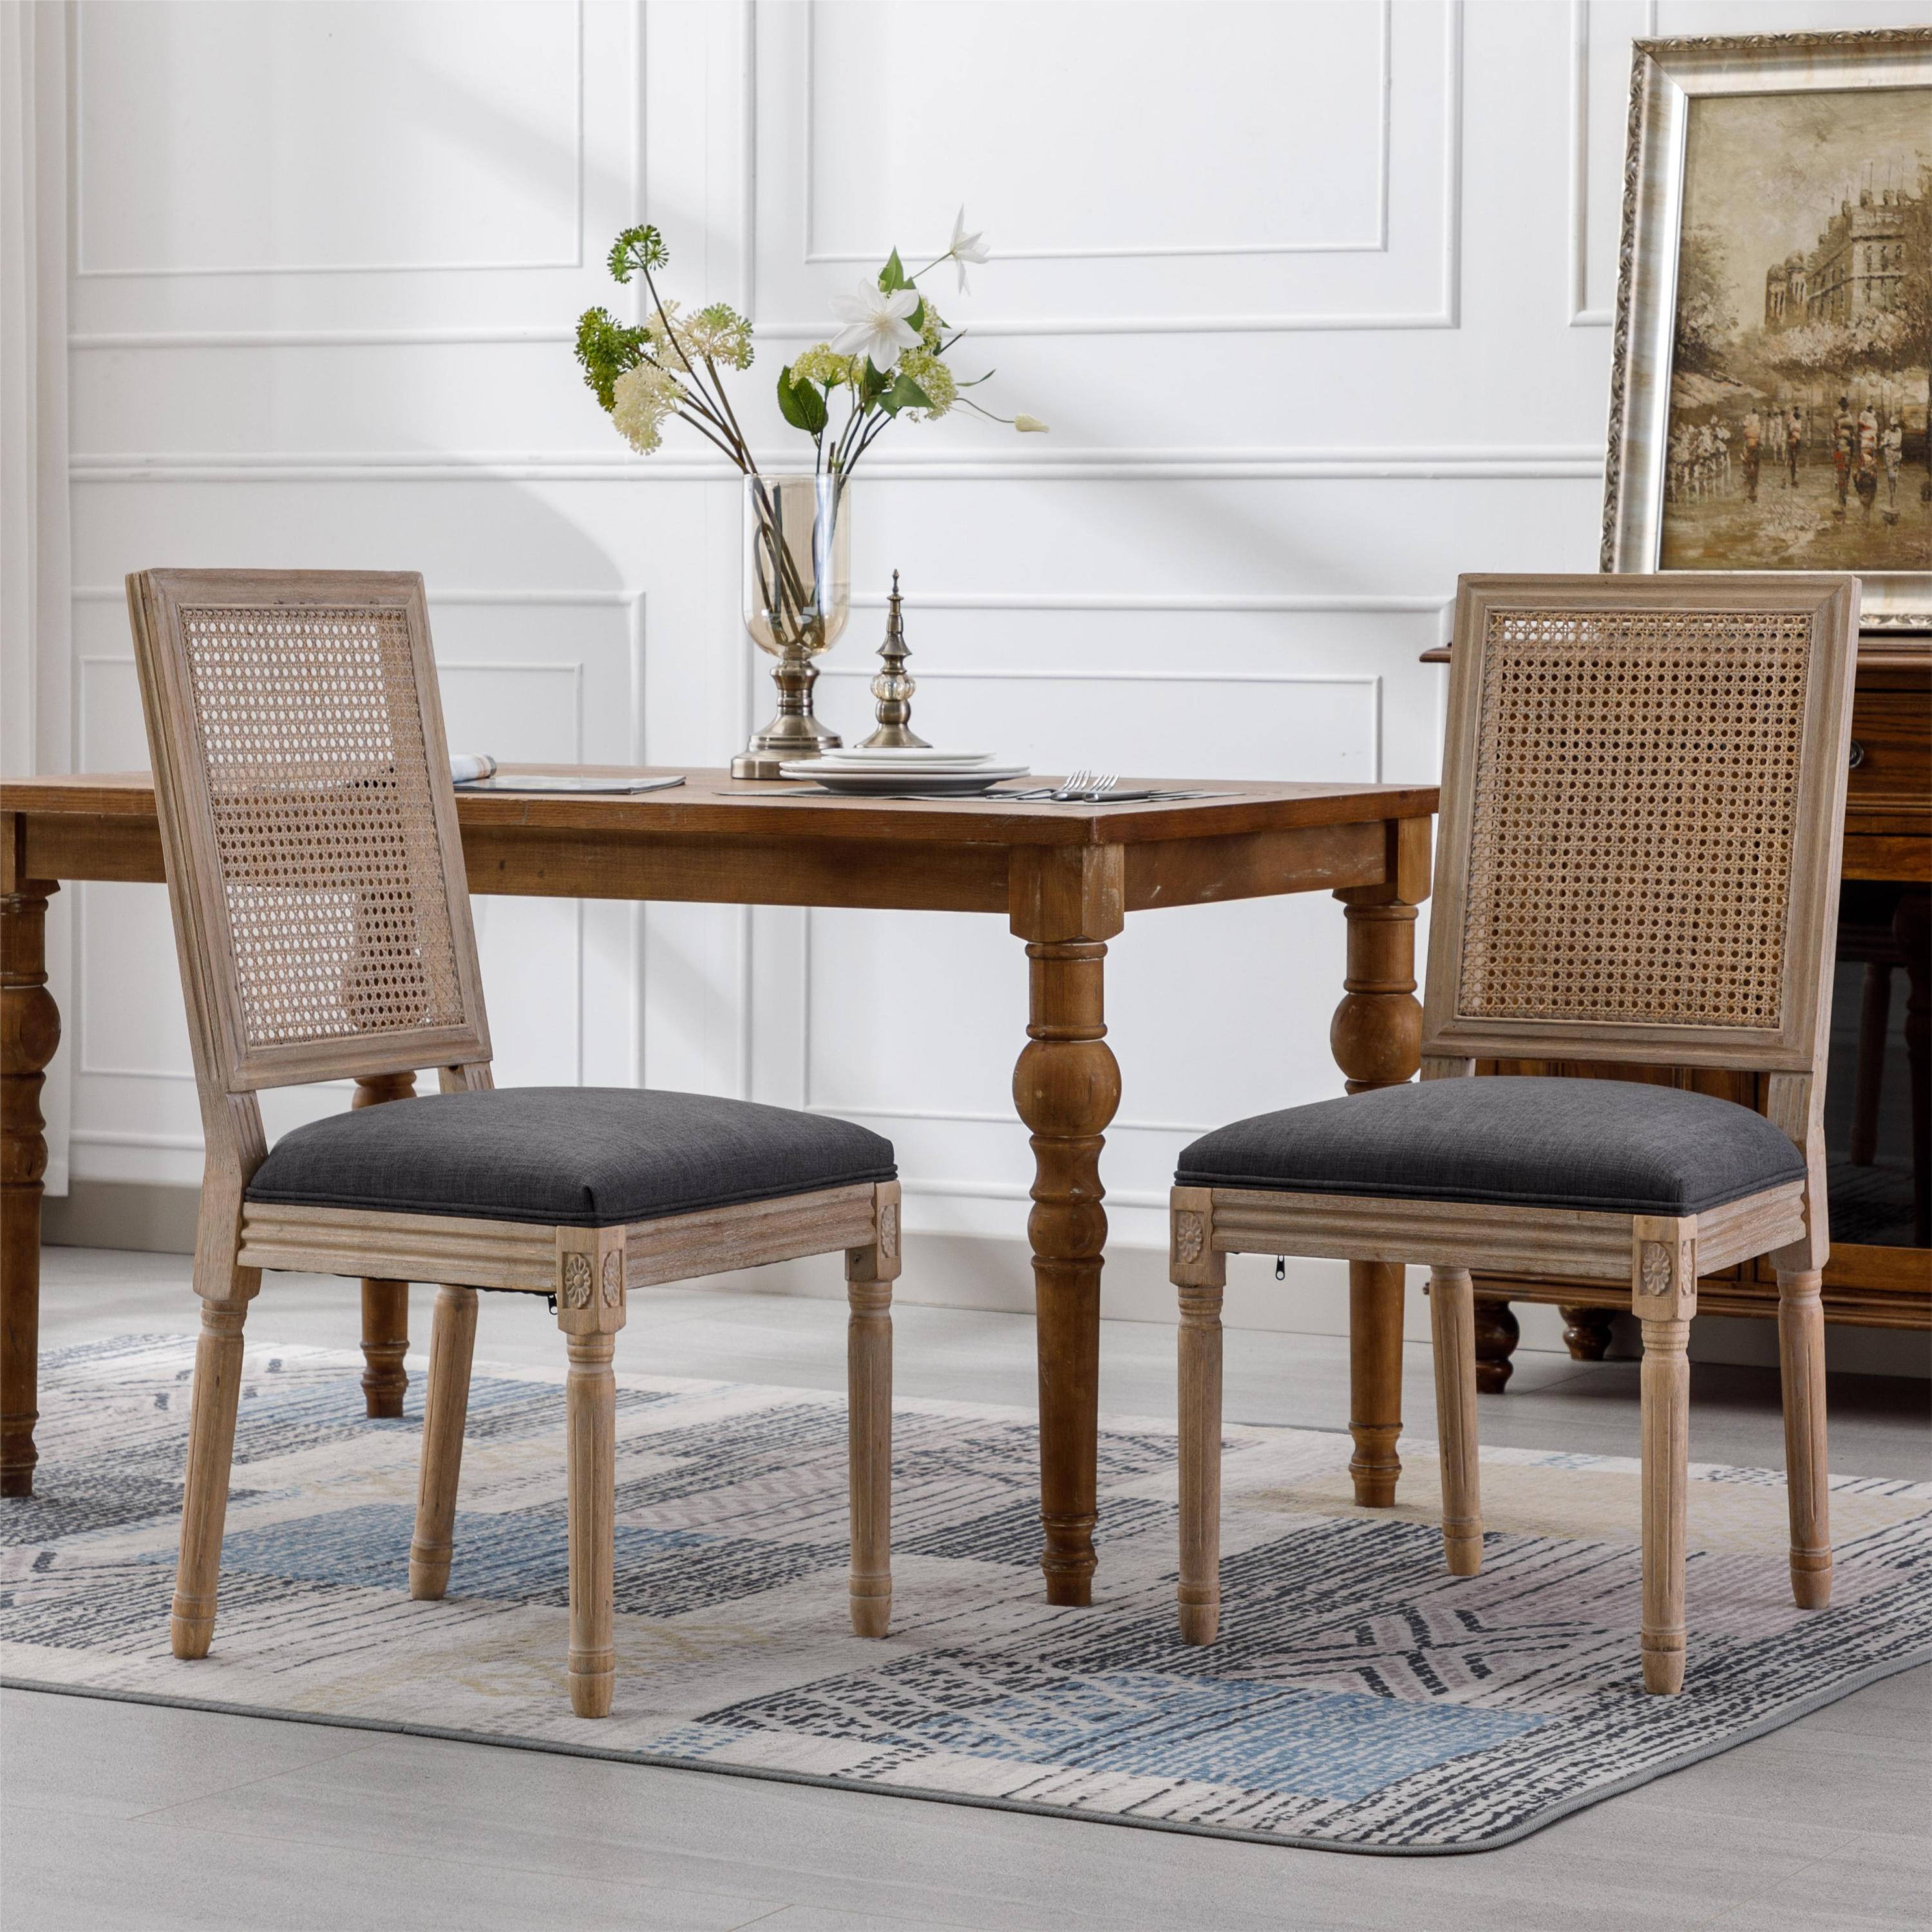 2 Pcs French Dining Chair, Linen Fabric Upholstered Farmhouse Dining Chairs